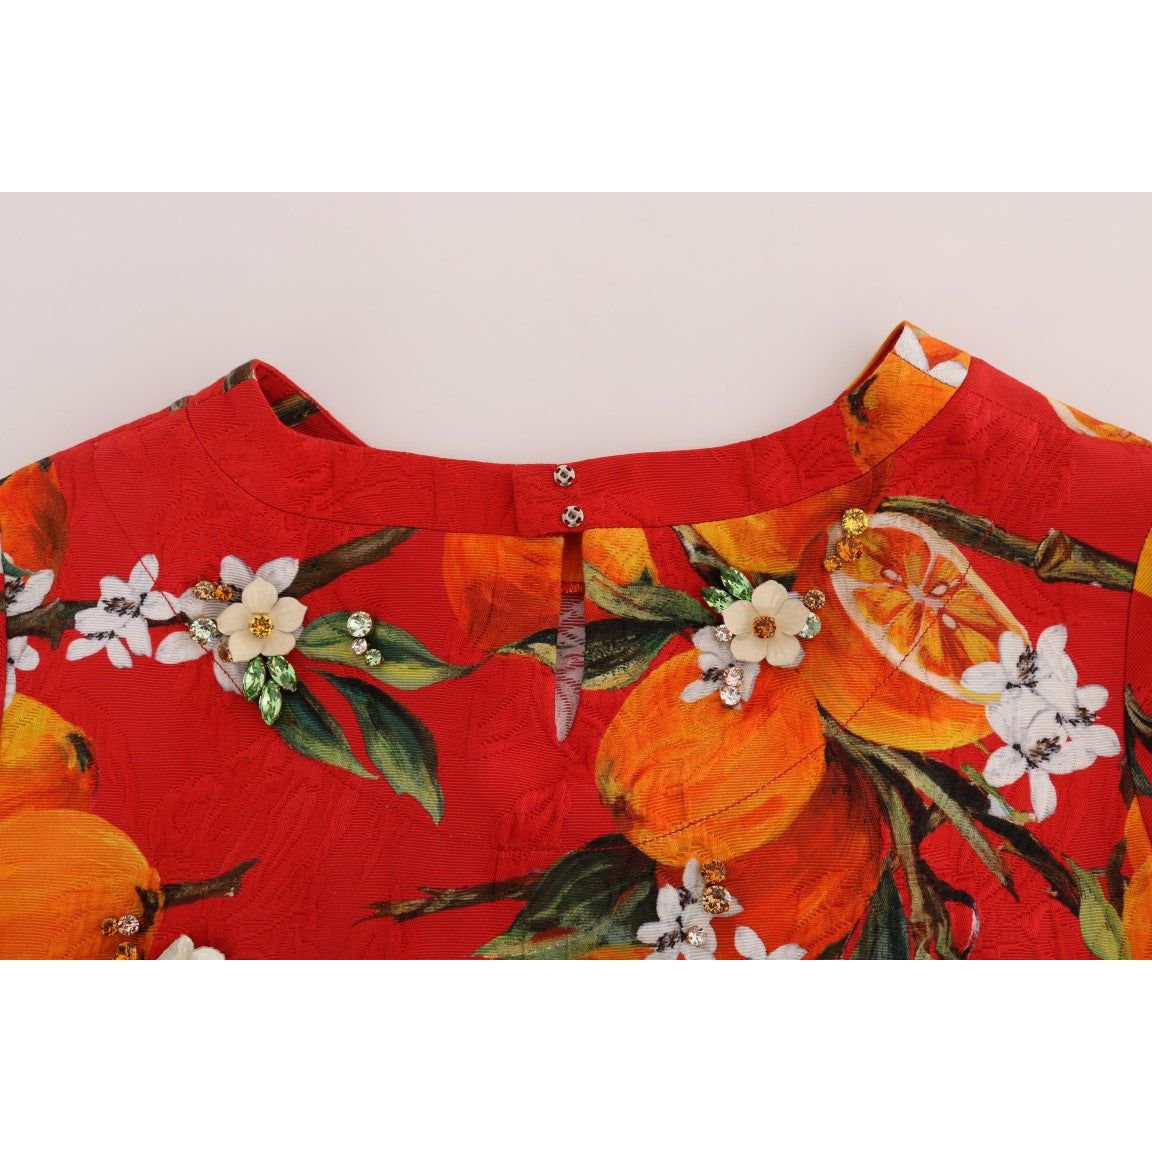 Dolce & Gabbana Embellished Crepe Blouse with Blossom Print embellished-crepe-blouse-with-blossom-print